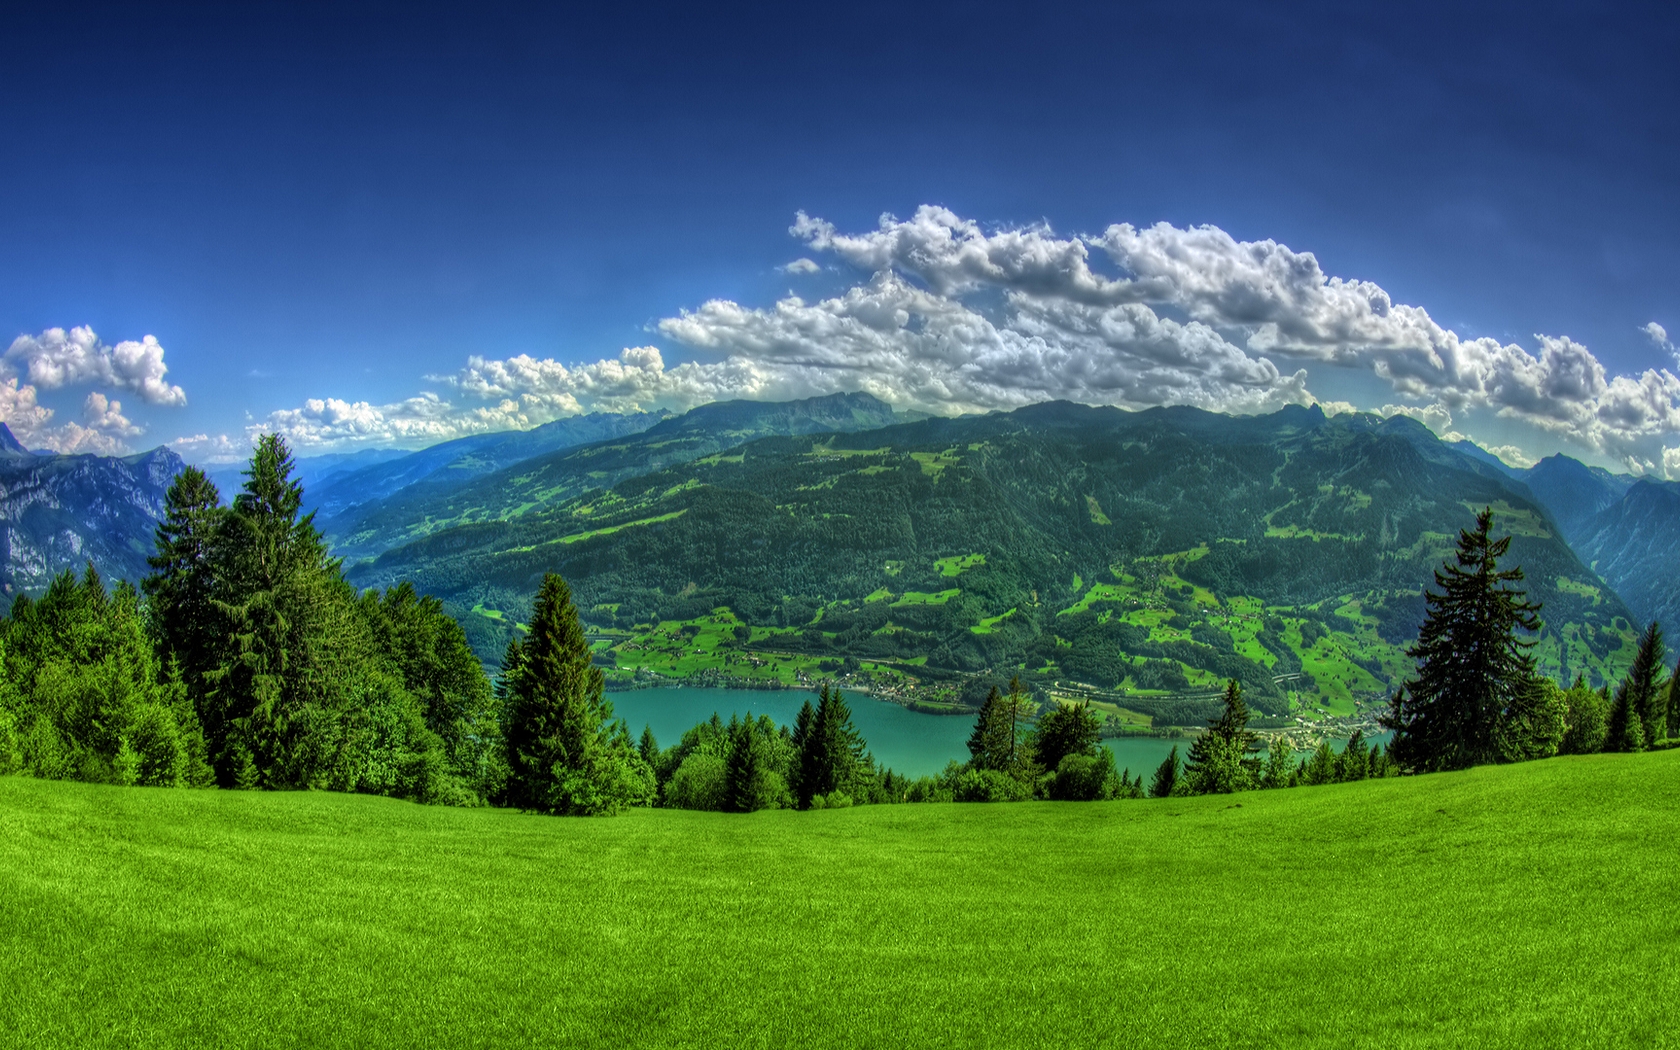 Image: water, clouds, mountains, sky, field, trees, nature